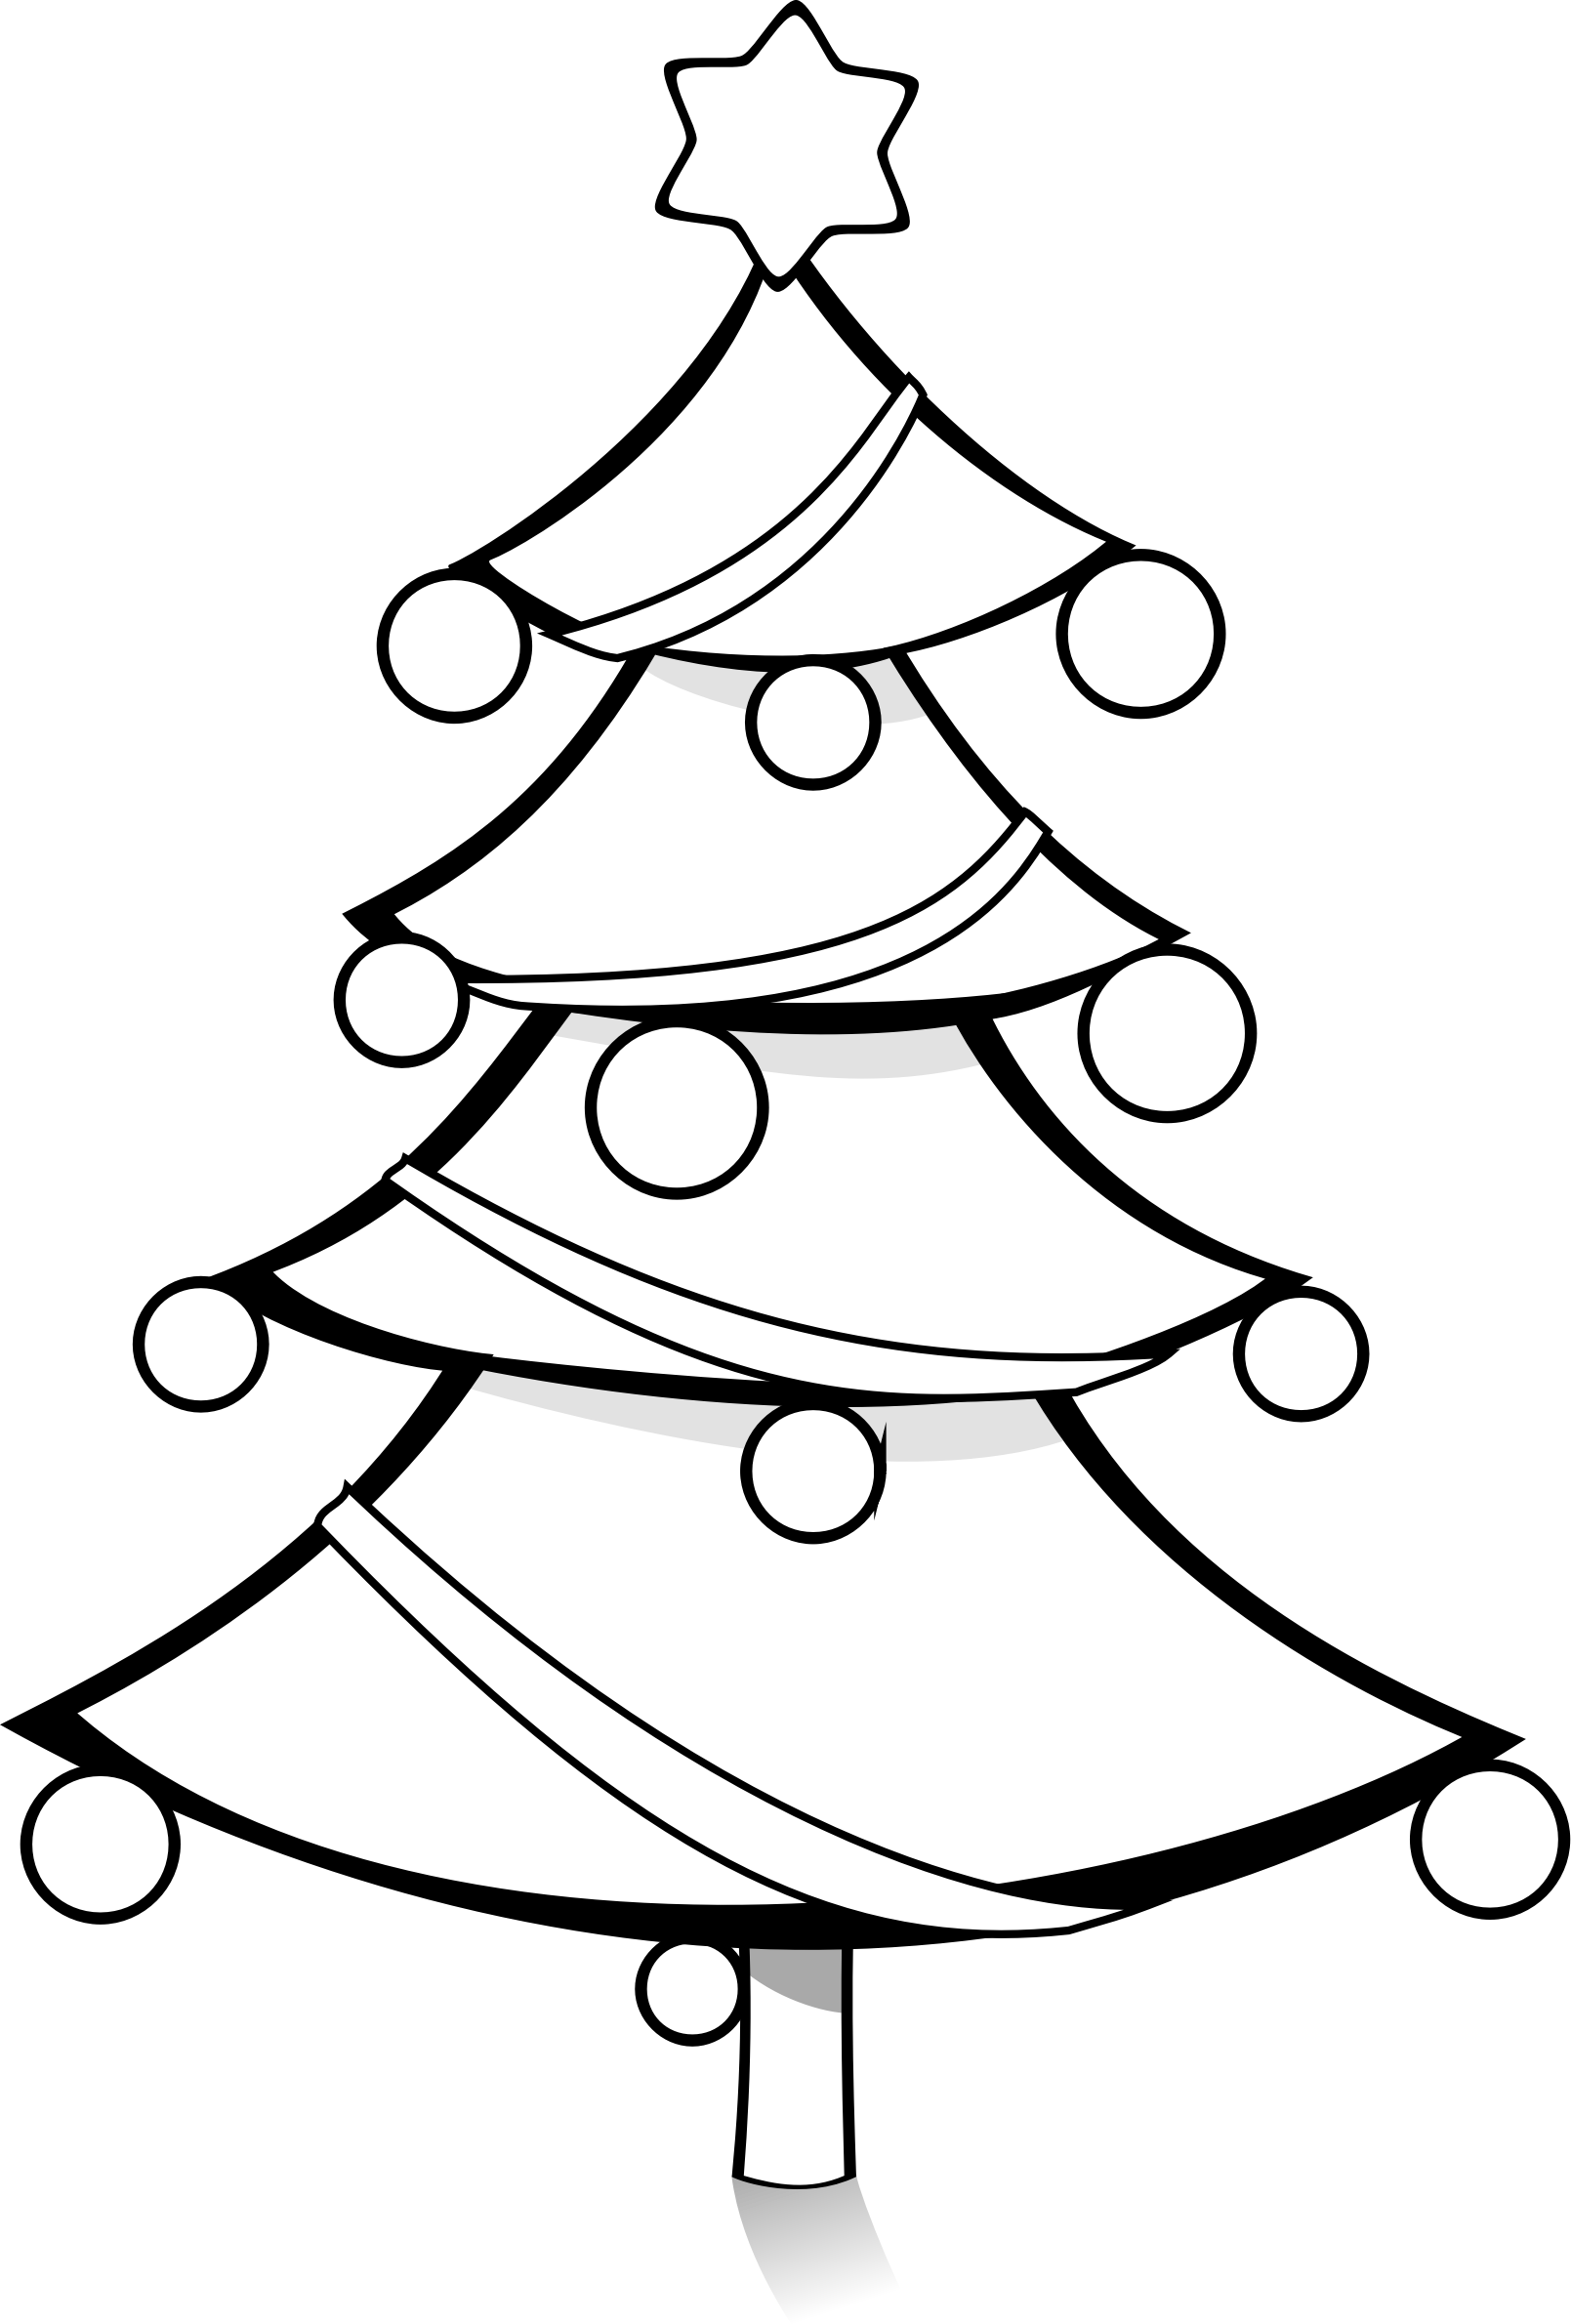 Download Christmas Tree Clip Art Black And White - Christmas Tree Black And  White PNG Image with No Background 